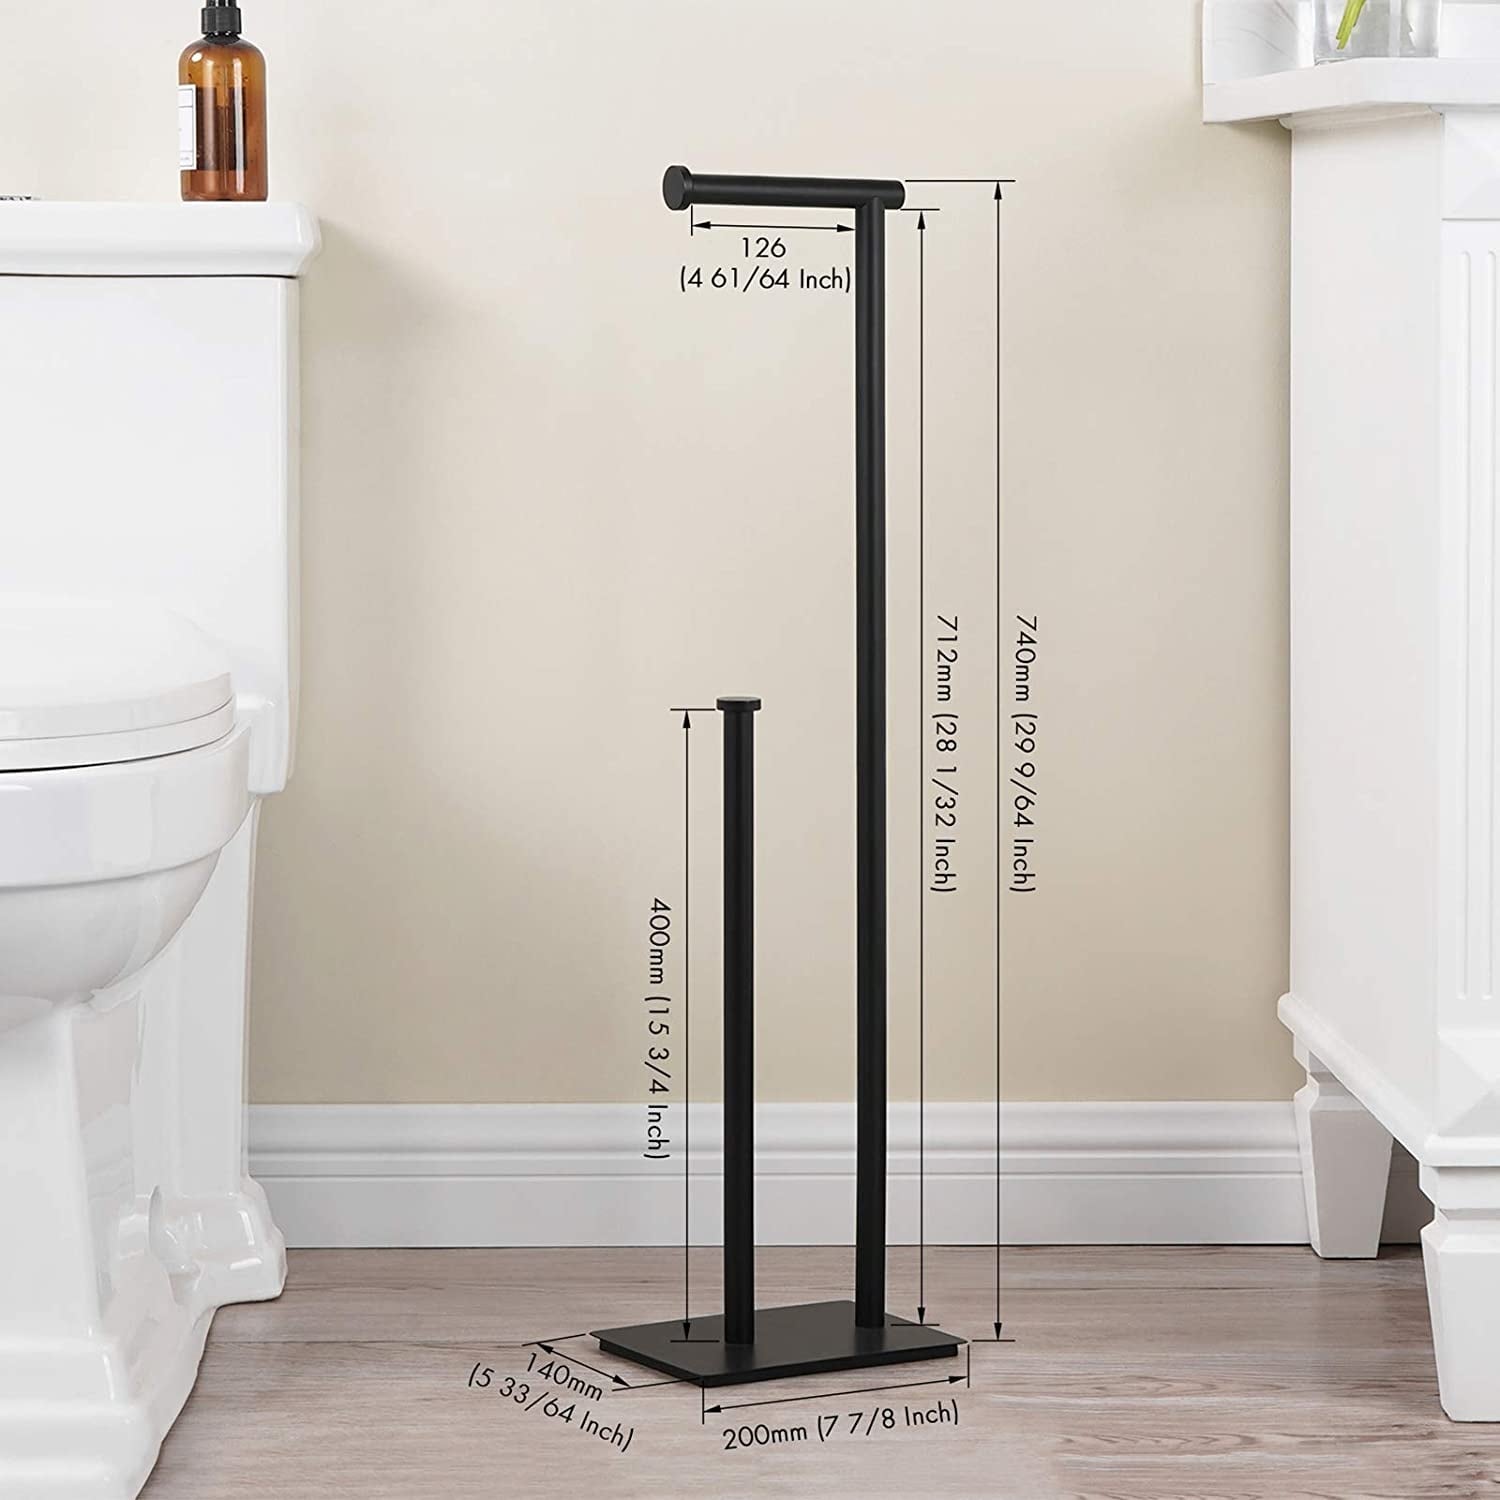 https://ak1.ostkcdn.com/images/products/is/images/direct/683b1b49133e9f94927424e5a2bdae55933d0415/29%22-Height-Freestanding-Toilet-Paper-Holder-with-Reserve.jpg